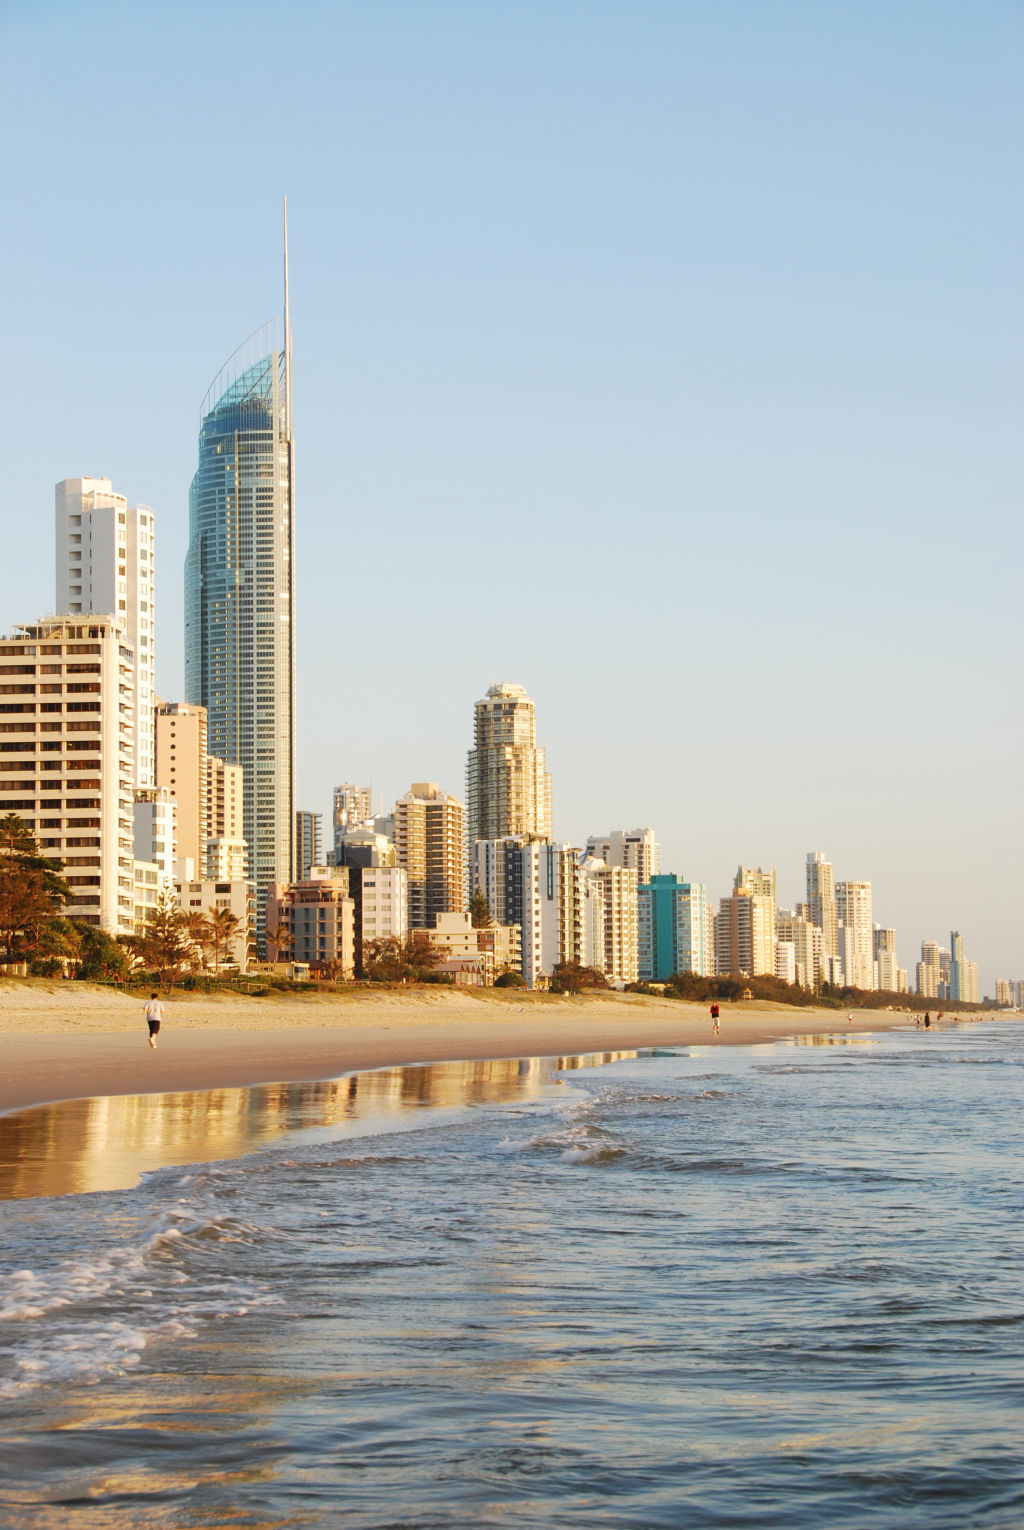 Units at Surfers Paradise are tipped to be a good buy. Photo: Jenny Bonner